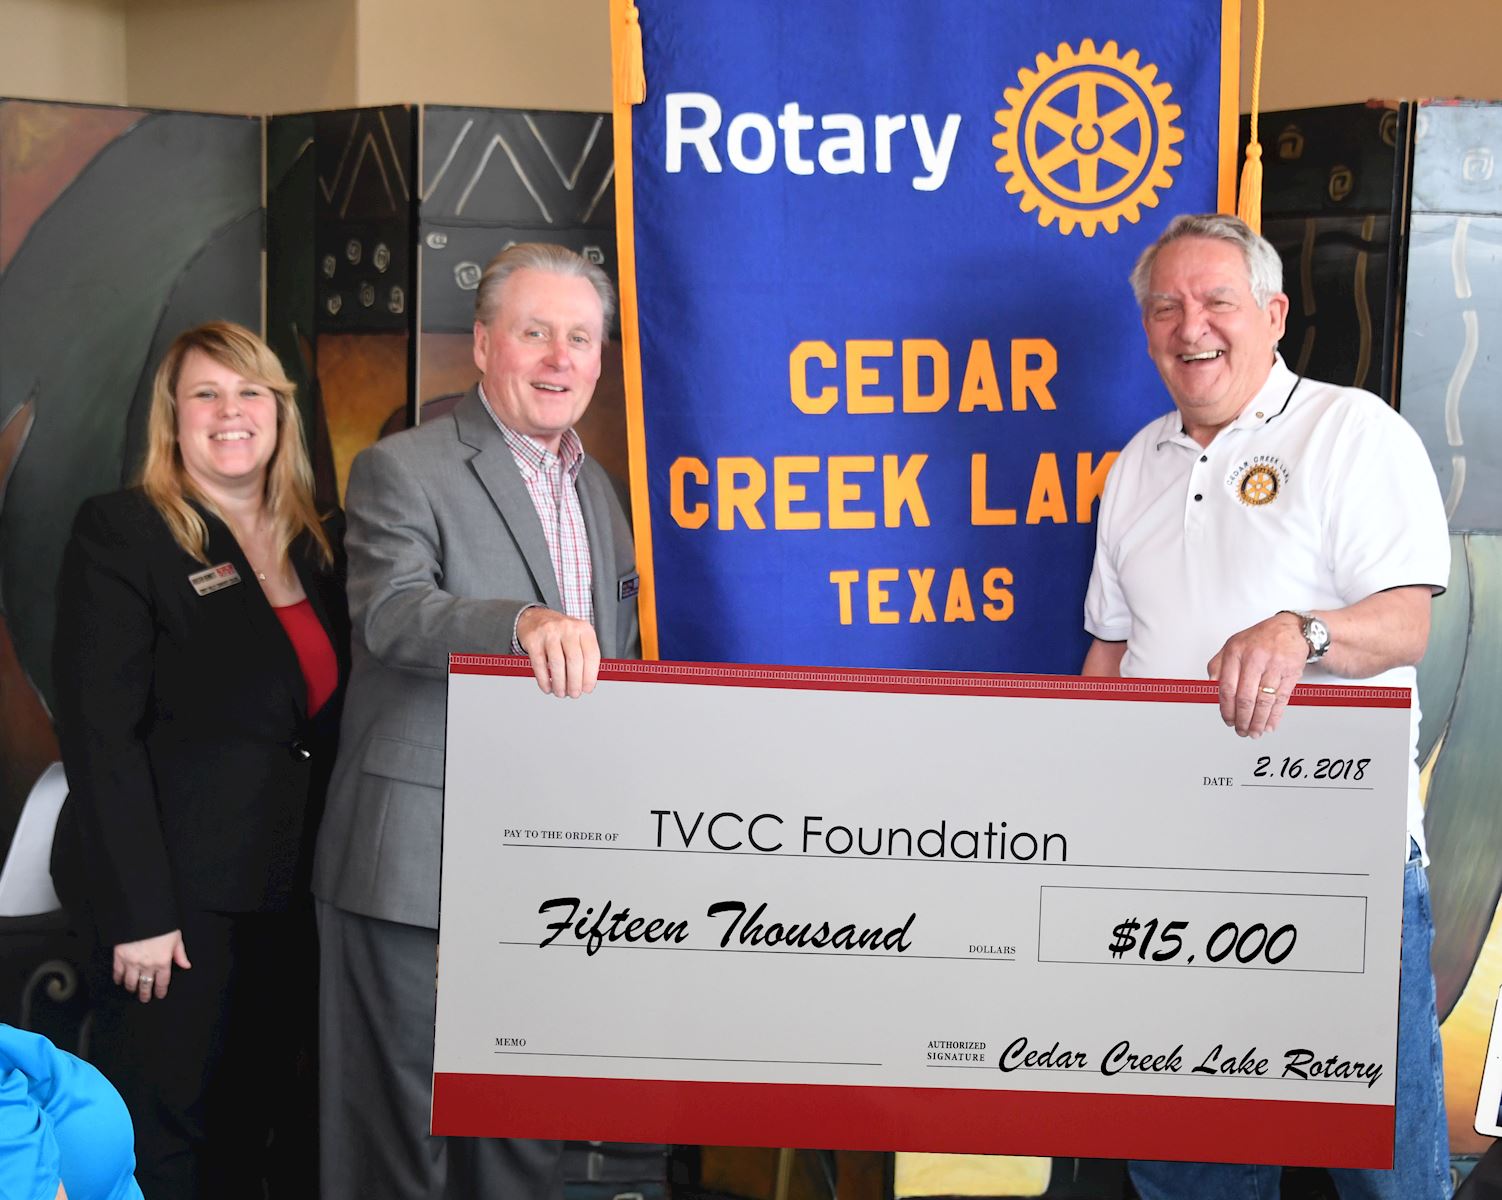 TVCC Vice President of Institutional Advancement/TVCC Foundation Executive Director Dr. Kristen O. Bennett and TVCC President Dr. Jerry King accept the big check from Cedar Creek Lake Rotary Club President Bill Burnett.